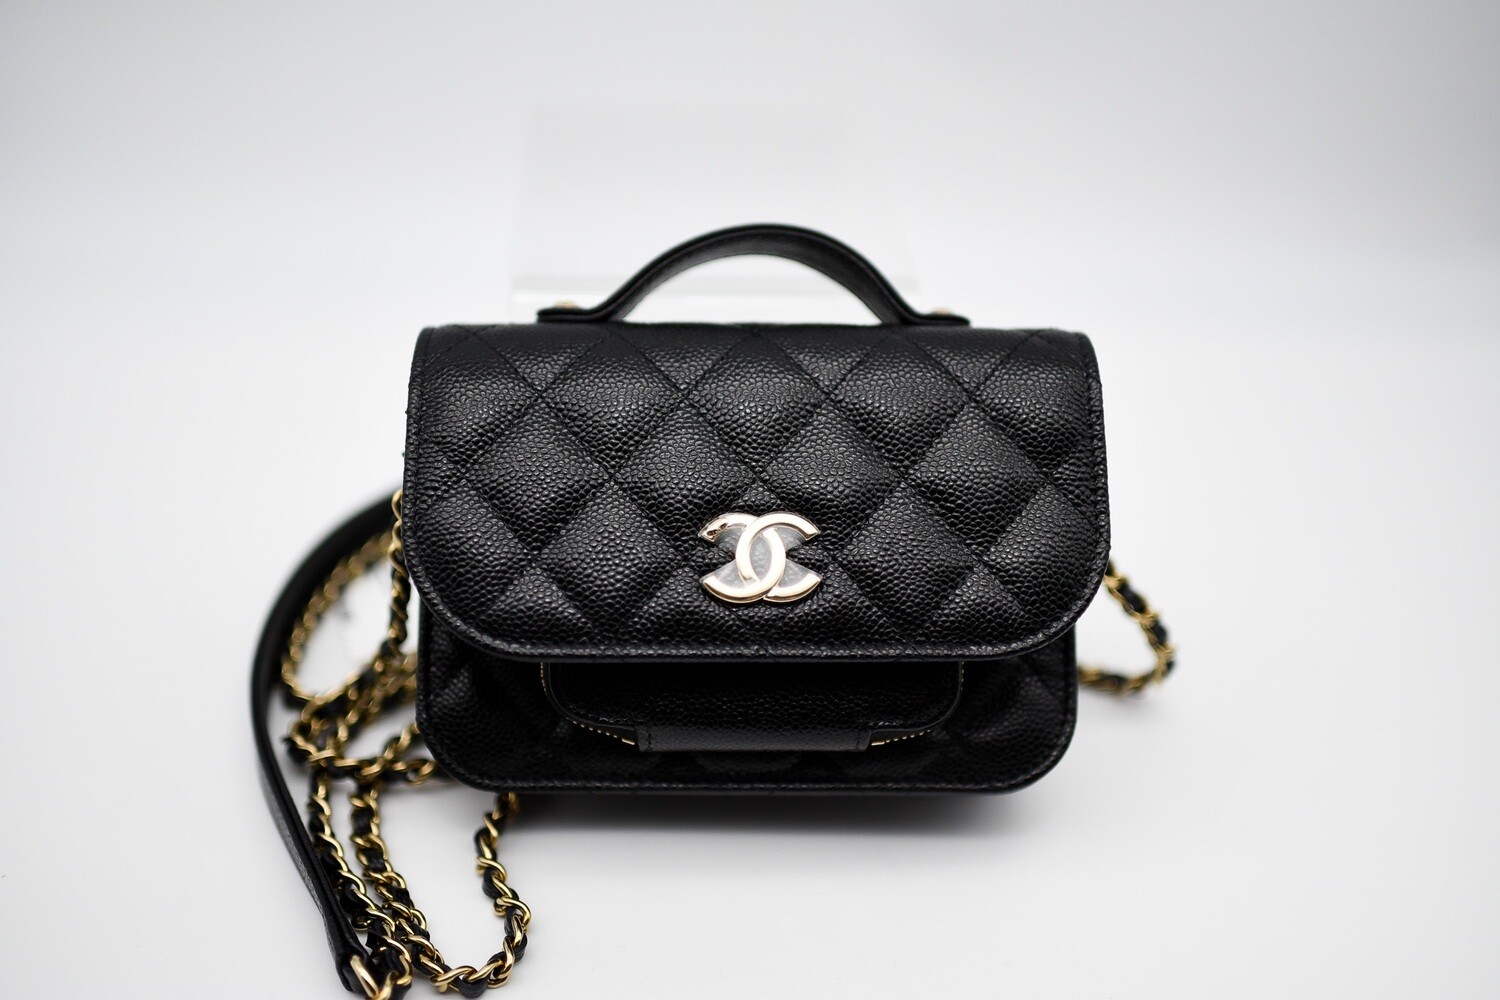 Chanel Business Affinity Purse Vanity Bag, 23P Black Caviar Leather with Gold Hardware, New in Box MA001